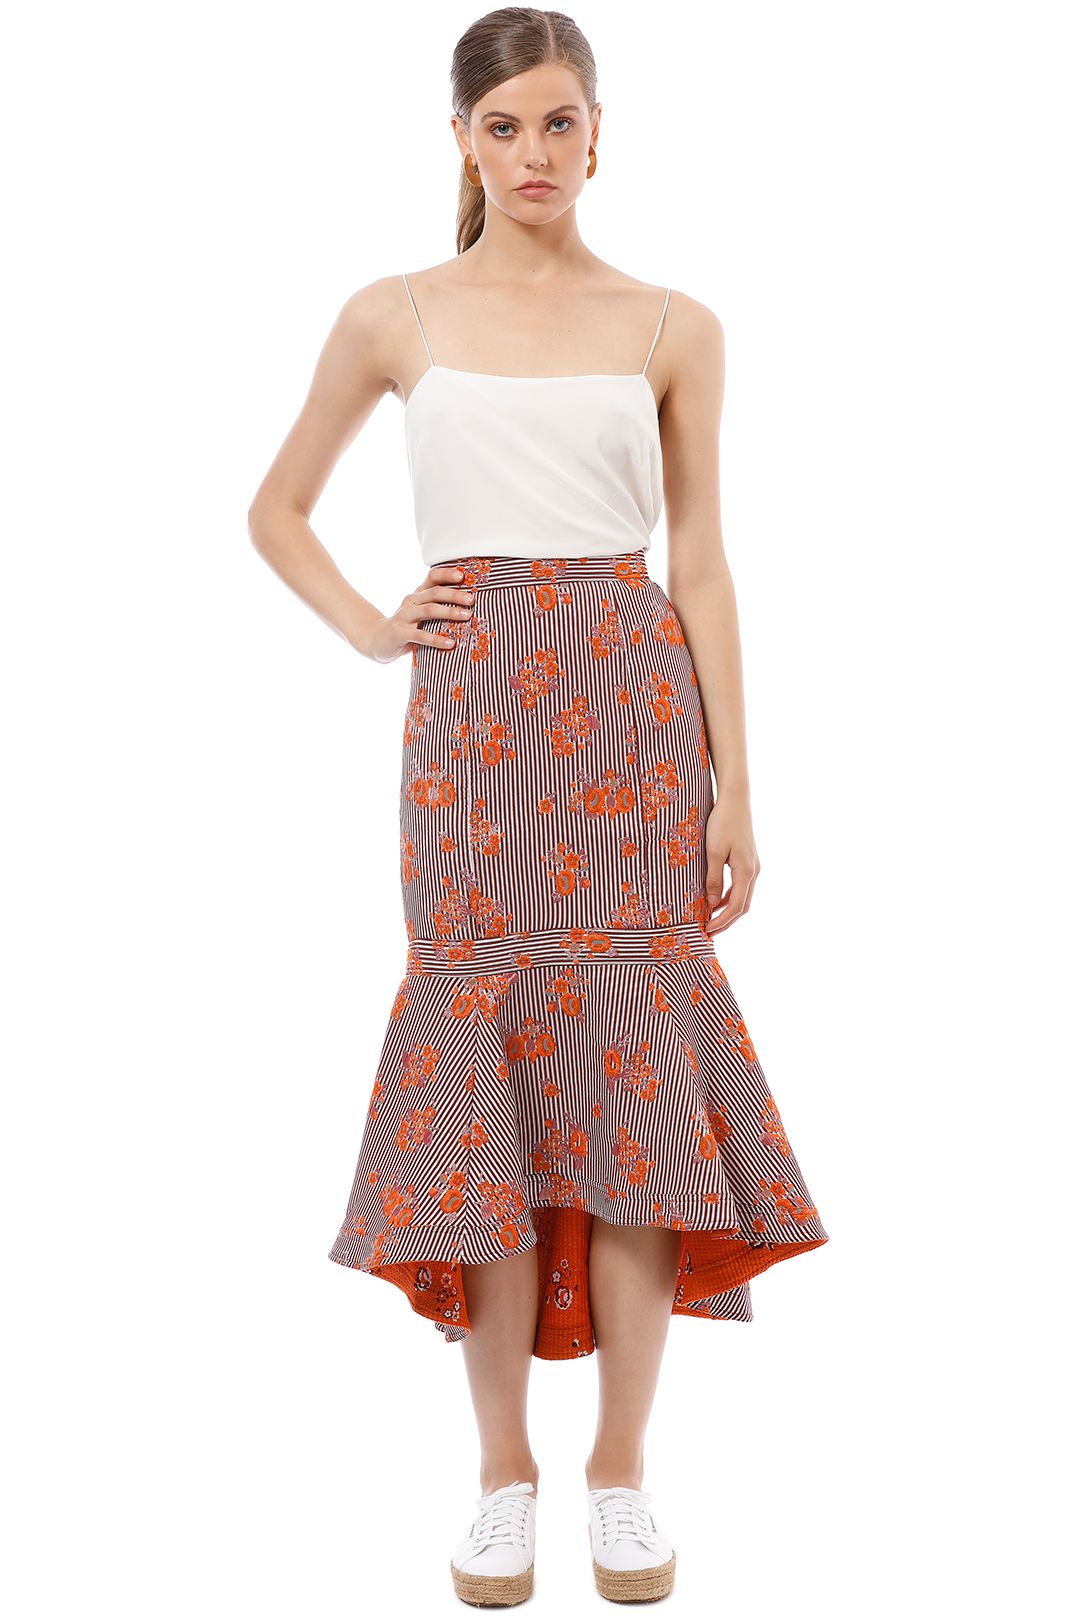 CMEO Collective - Fixation Skirt - Floral - Front